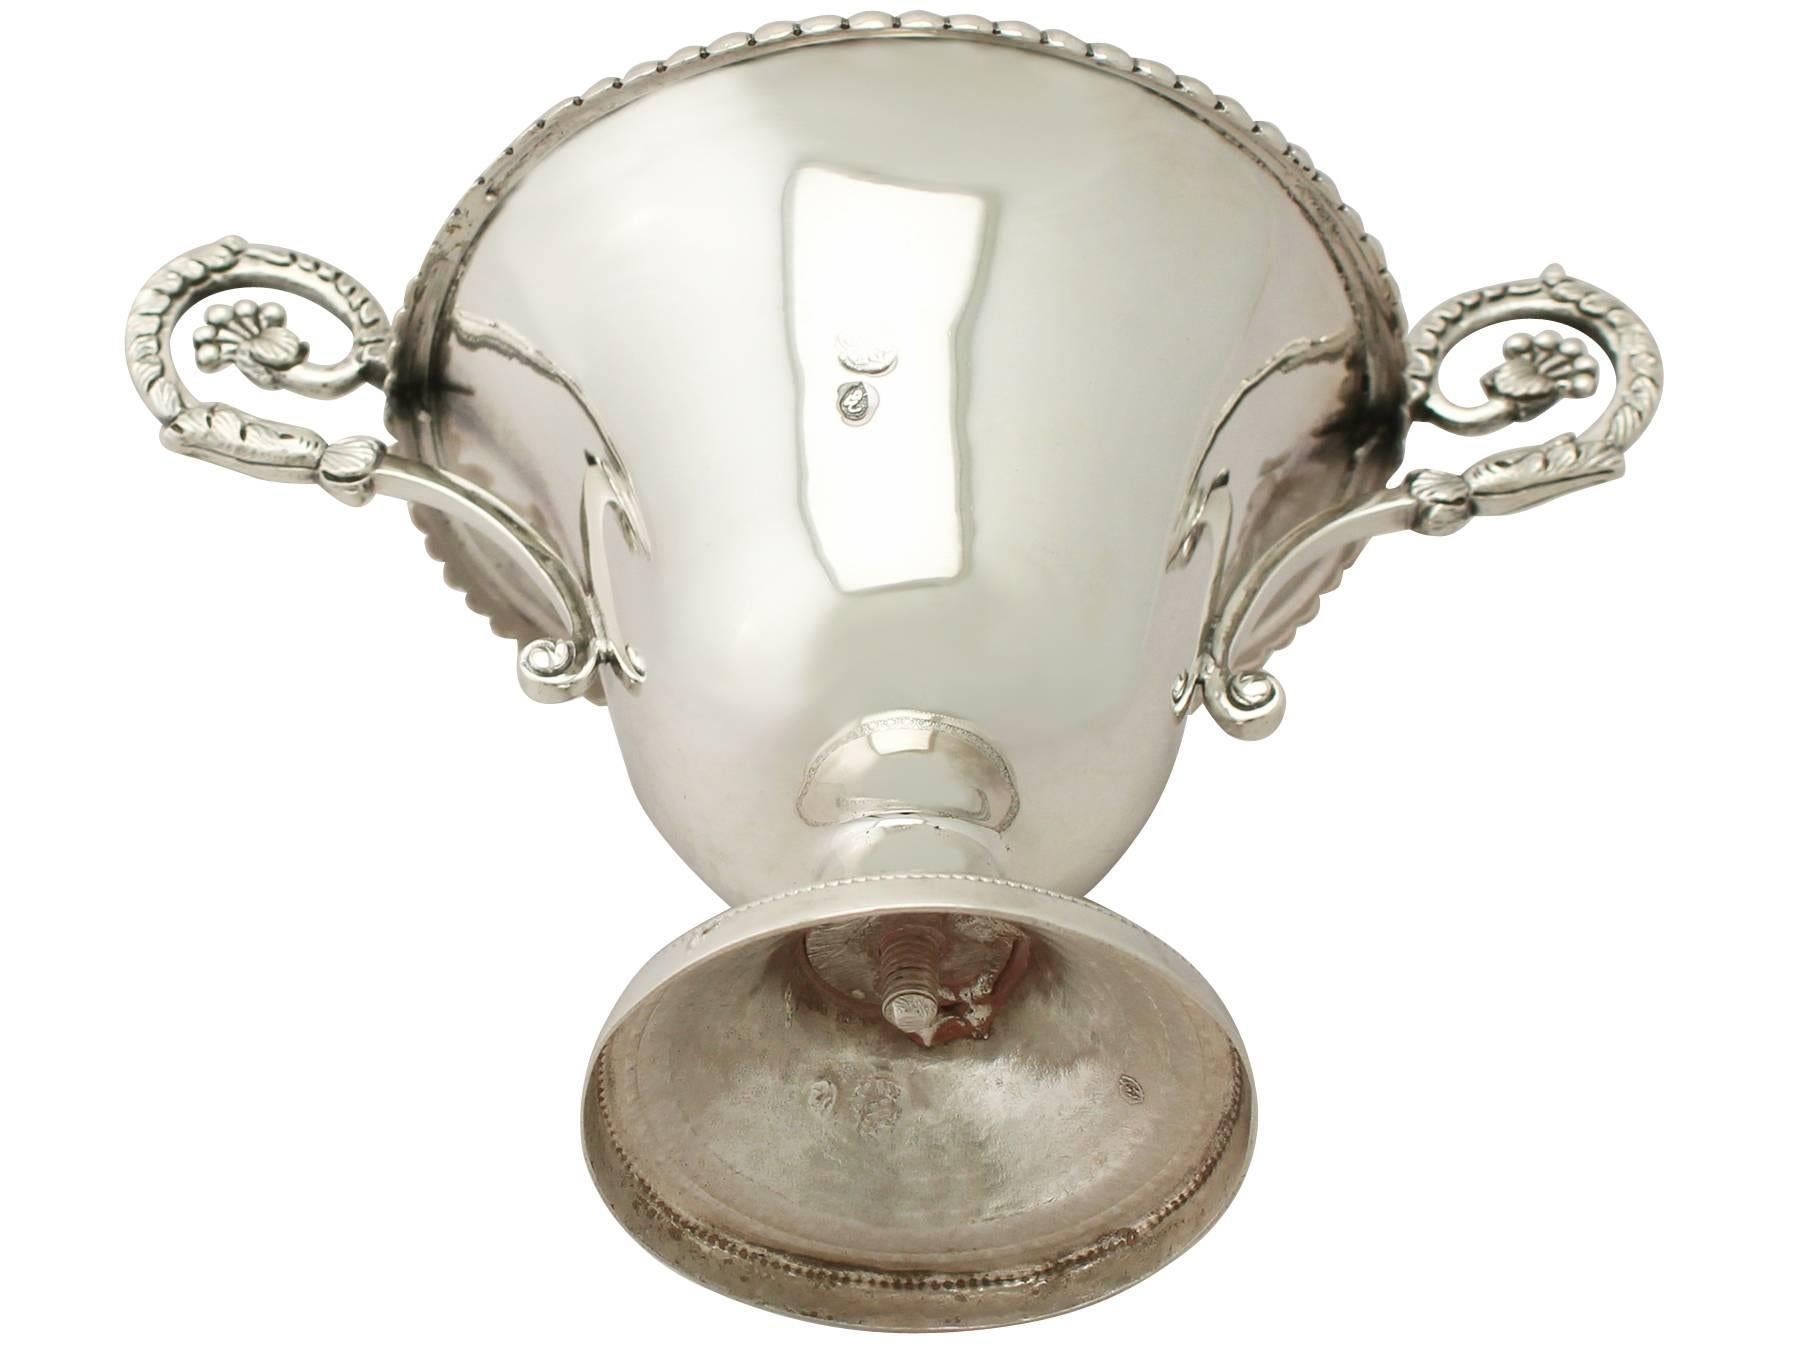 1880s Turkish Silver Cup and Cover 5